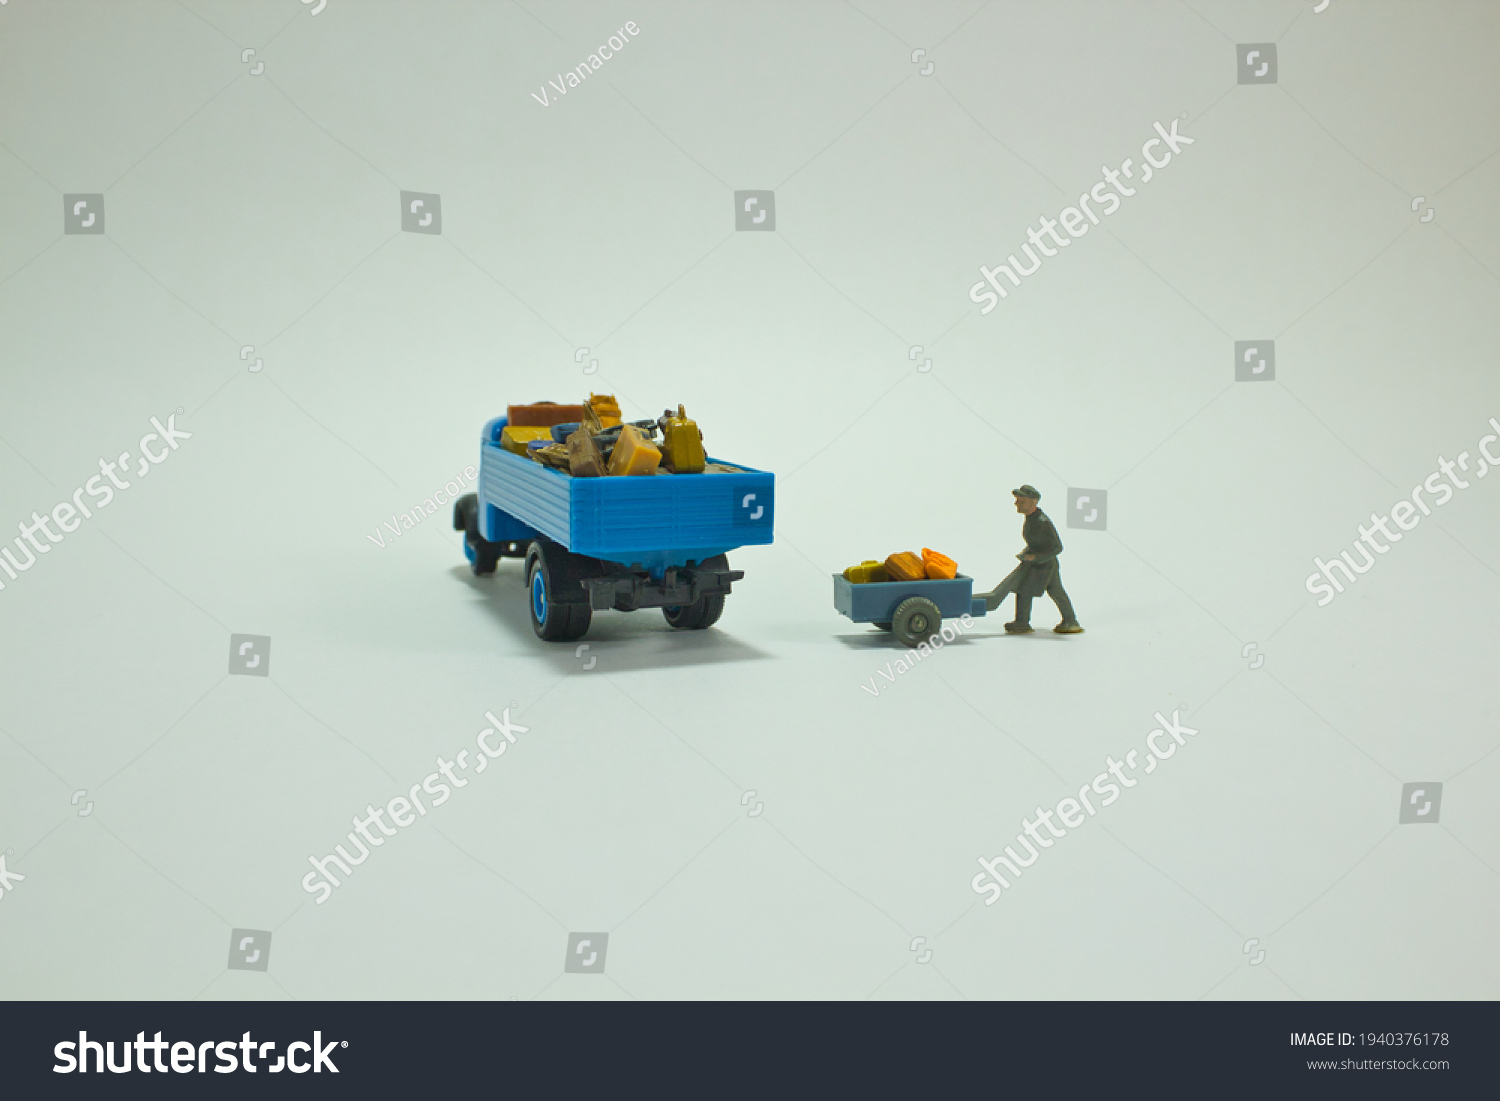 View of a miniature figure scene. A blue truck stands fully loaded with luggage while a worker pushes a handcart with other luggage to the truck. White background. Loading and transportation concept #1940376178